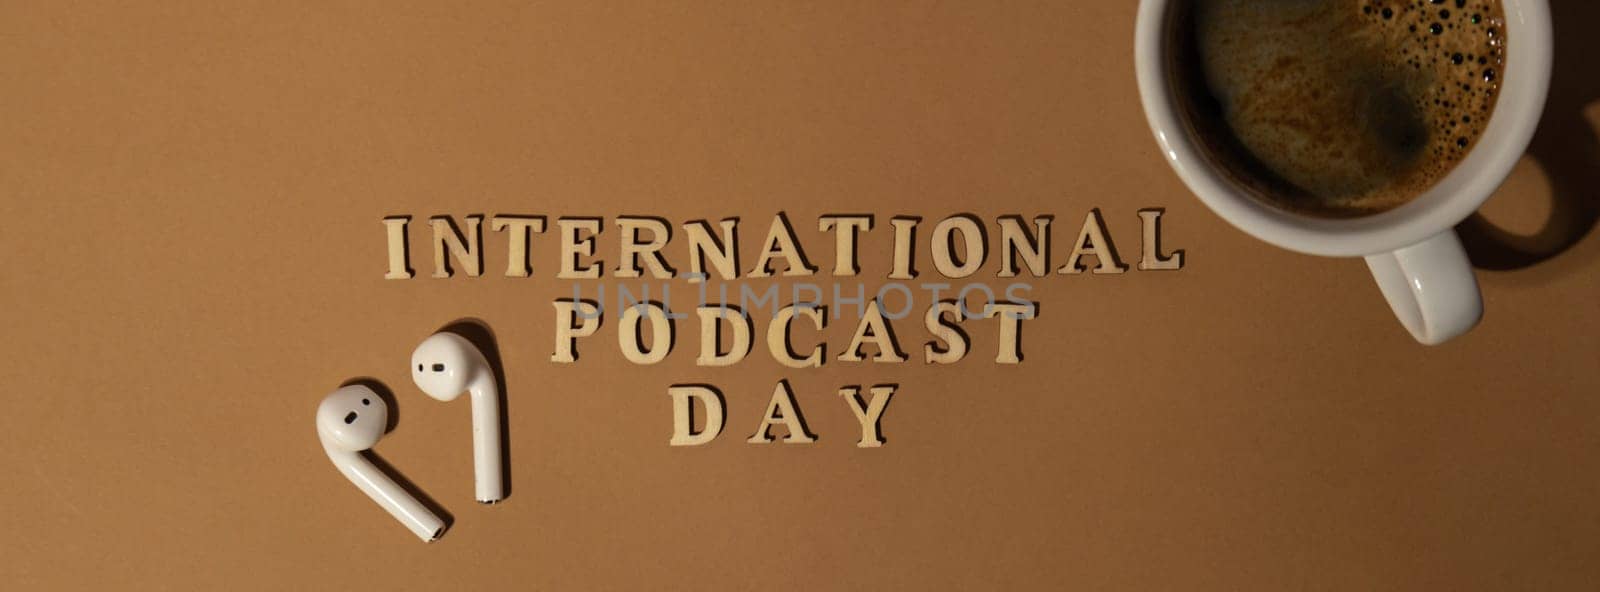 Announcement text INTERNATIONAL PODCAST DAY on beige background with white cup of coffee wireless headphones. Podcasting concept. Listening radio audio healing wellness sound health habits